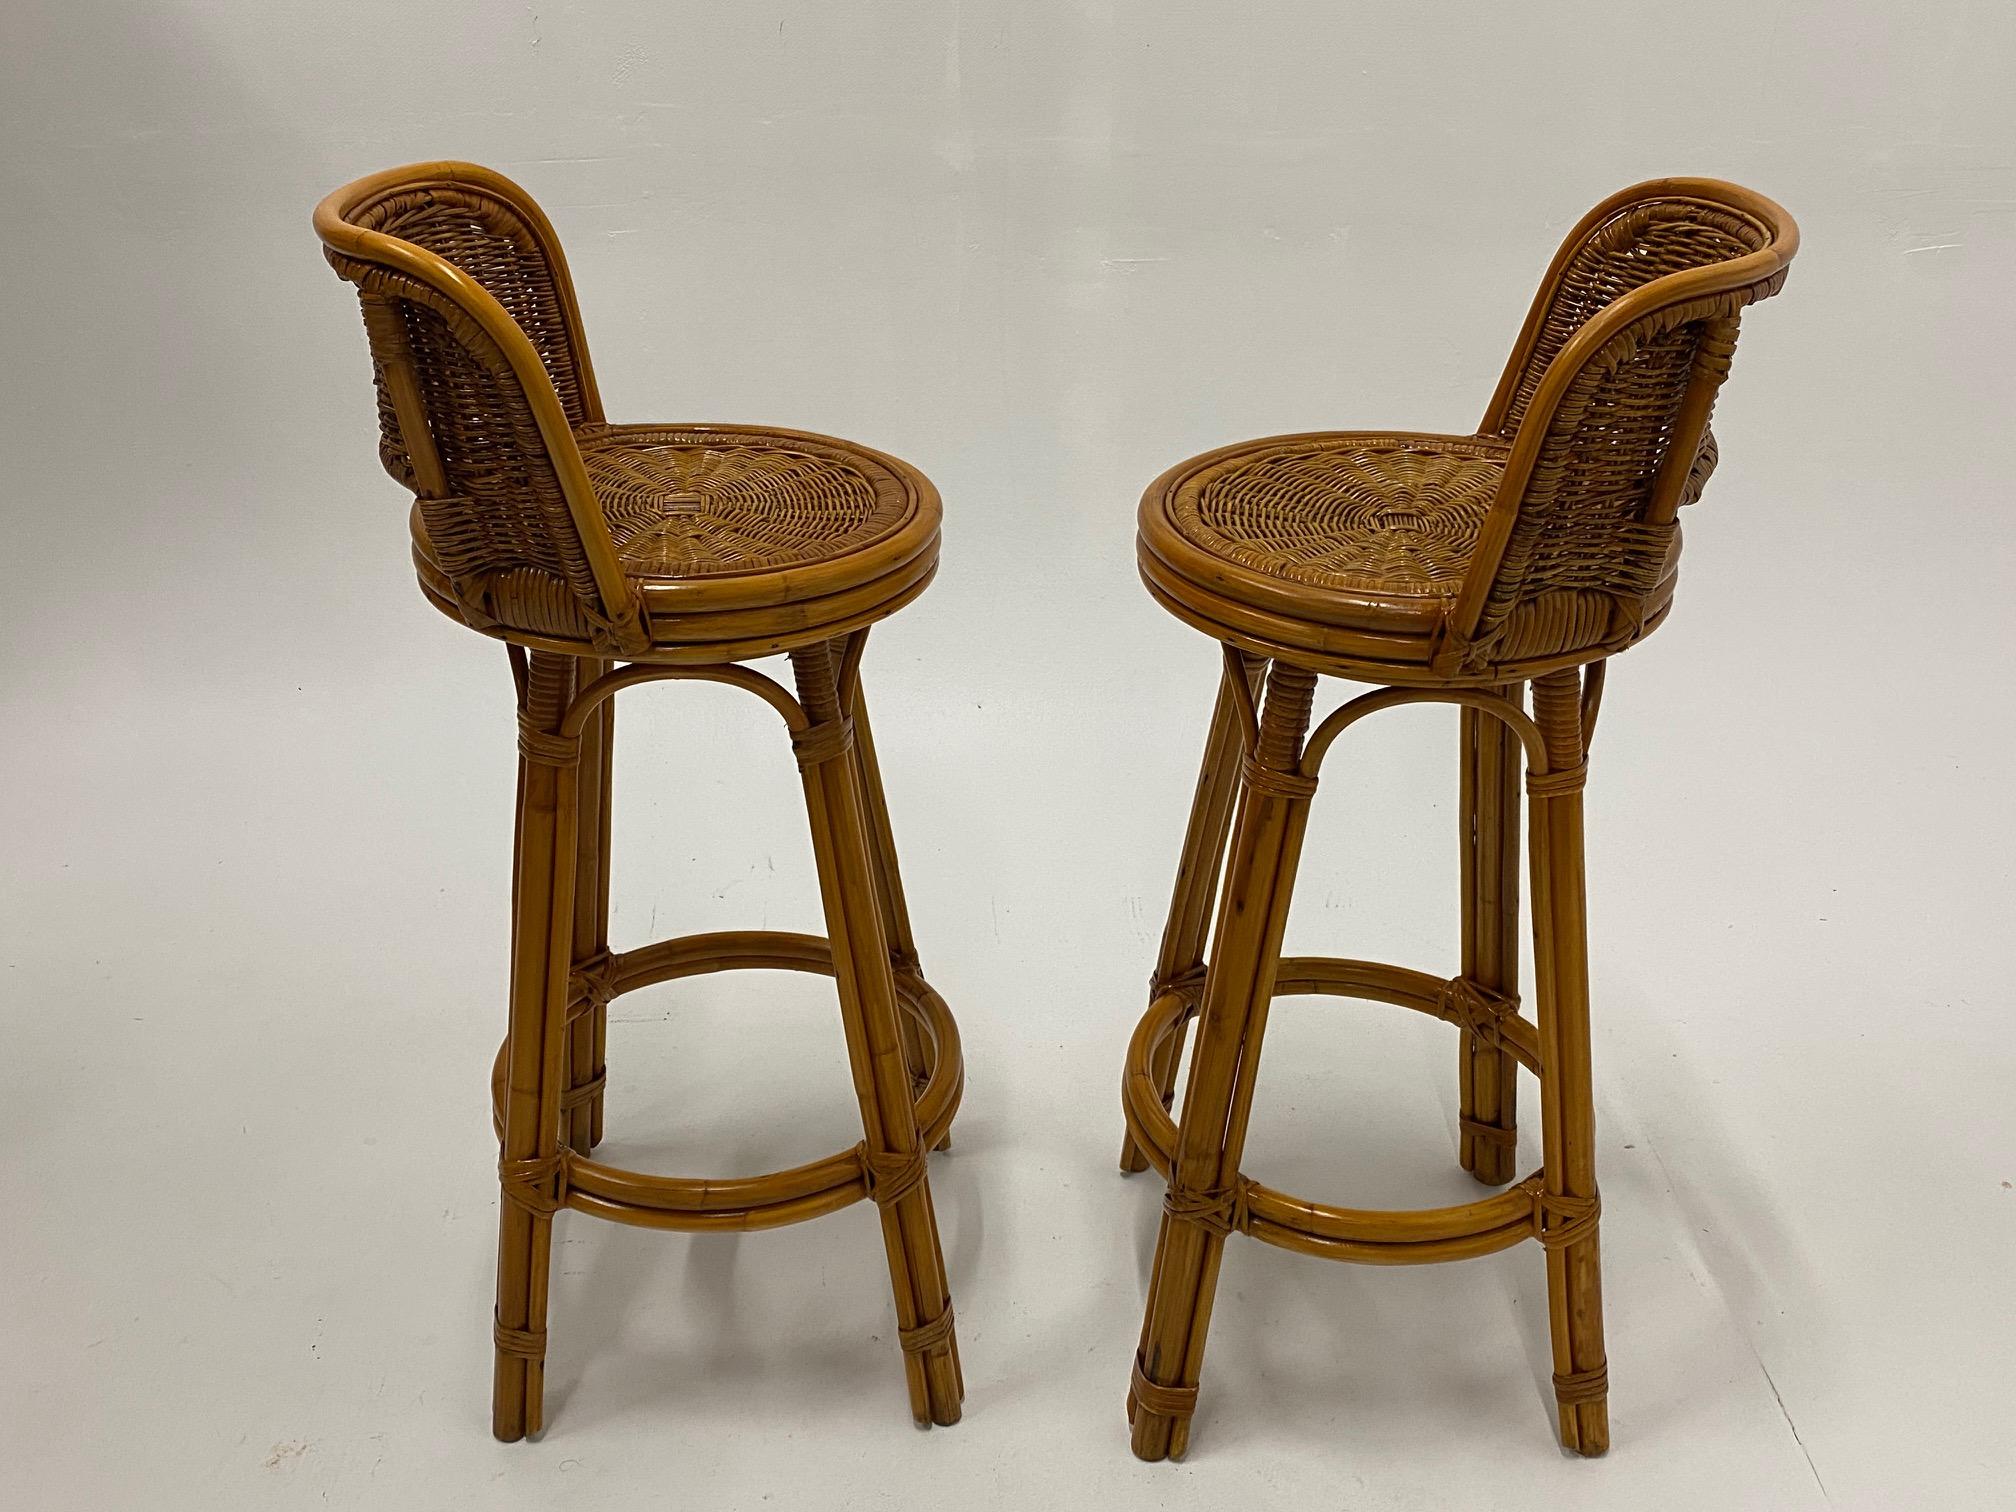 A cool woven rattan pair of Mid-Century Modern barstools having comfy curved backs and ring shaped foot rests.